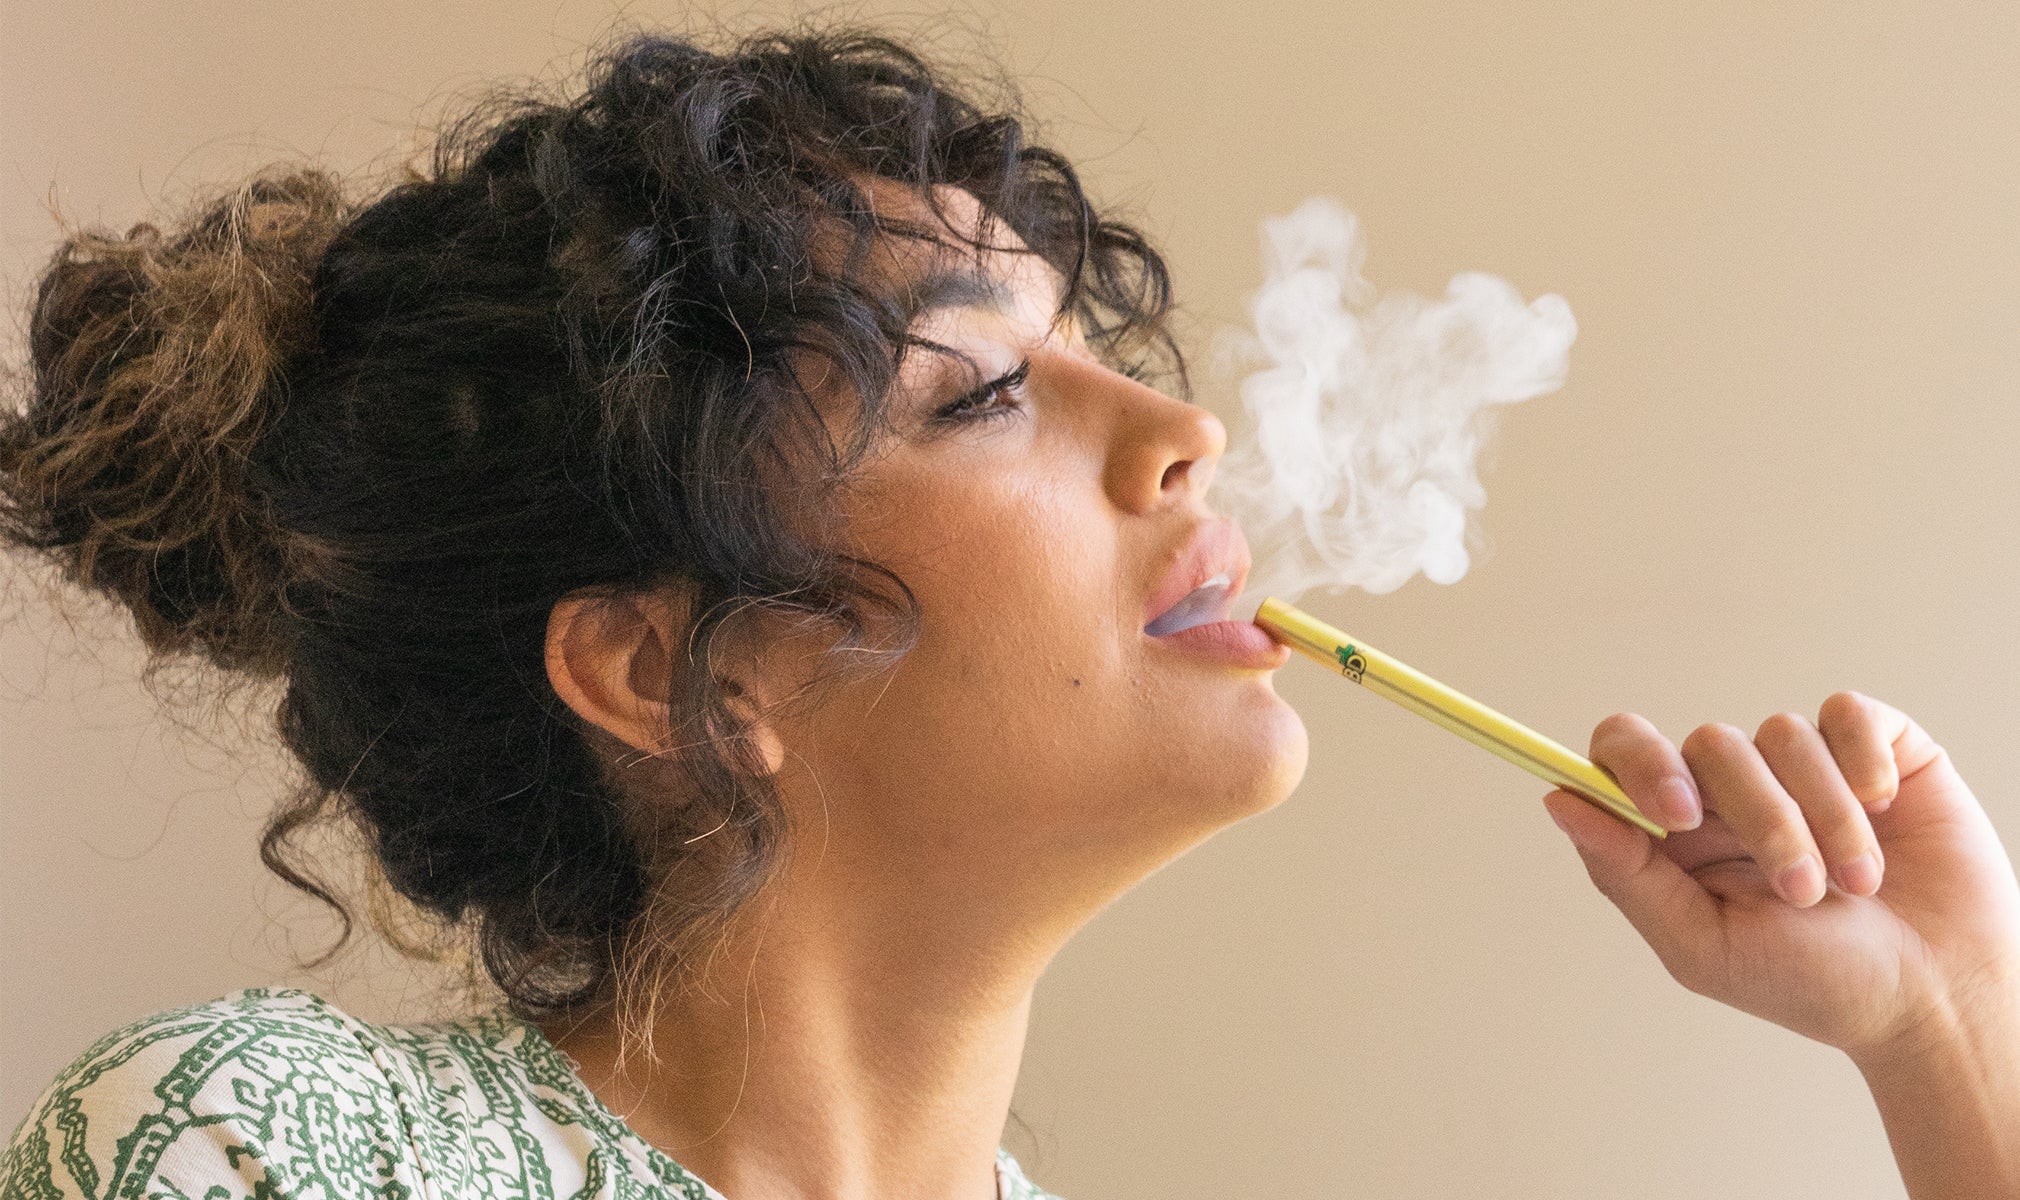 Can You Use CBD Oil to Stop Smoking?